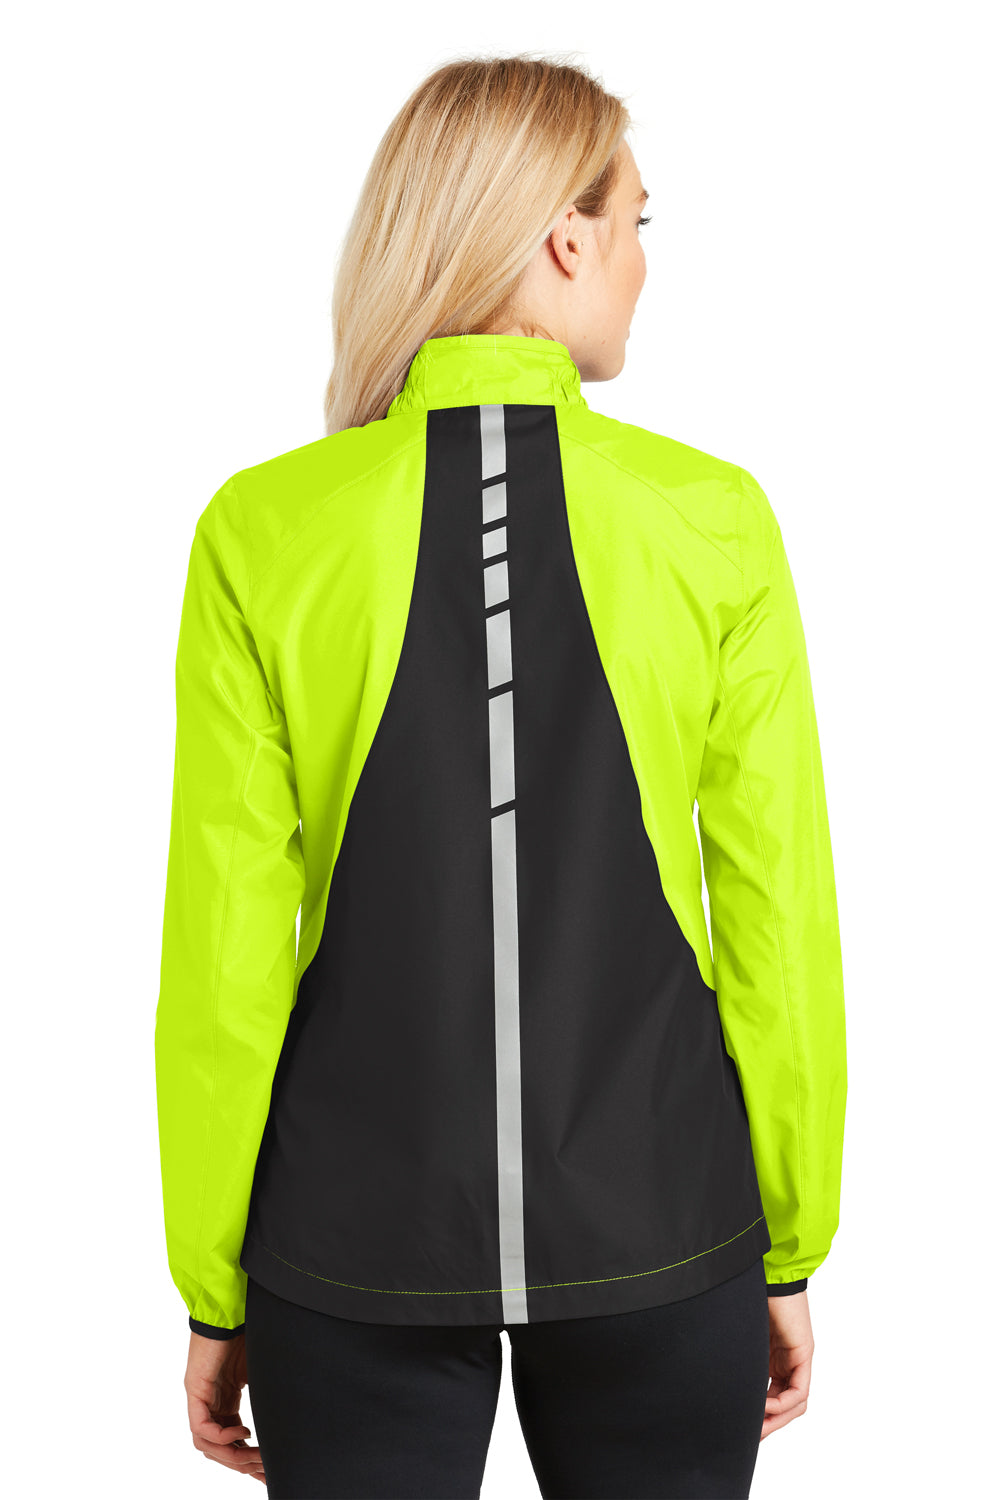 Port Authority L345 Womens Zephyr Reflective Hit Wind & Water Resistant Full Zip Jacket Safety Yellow Back